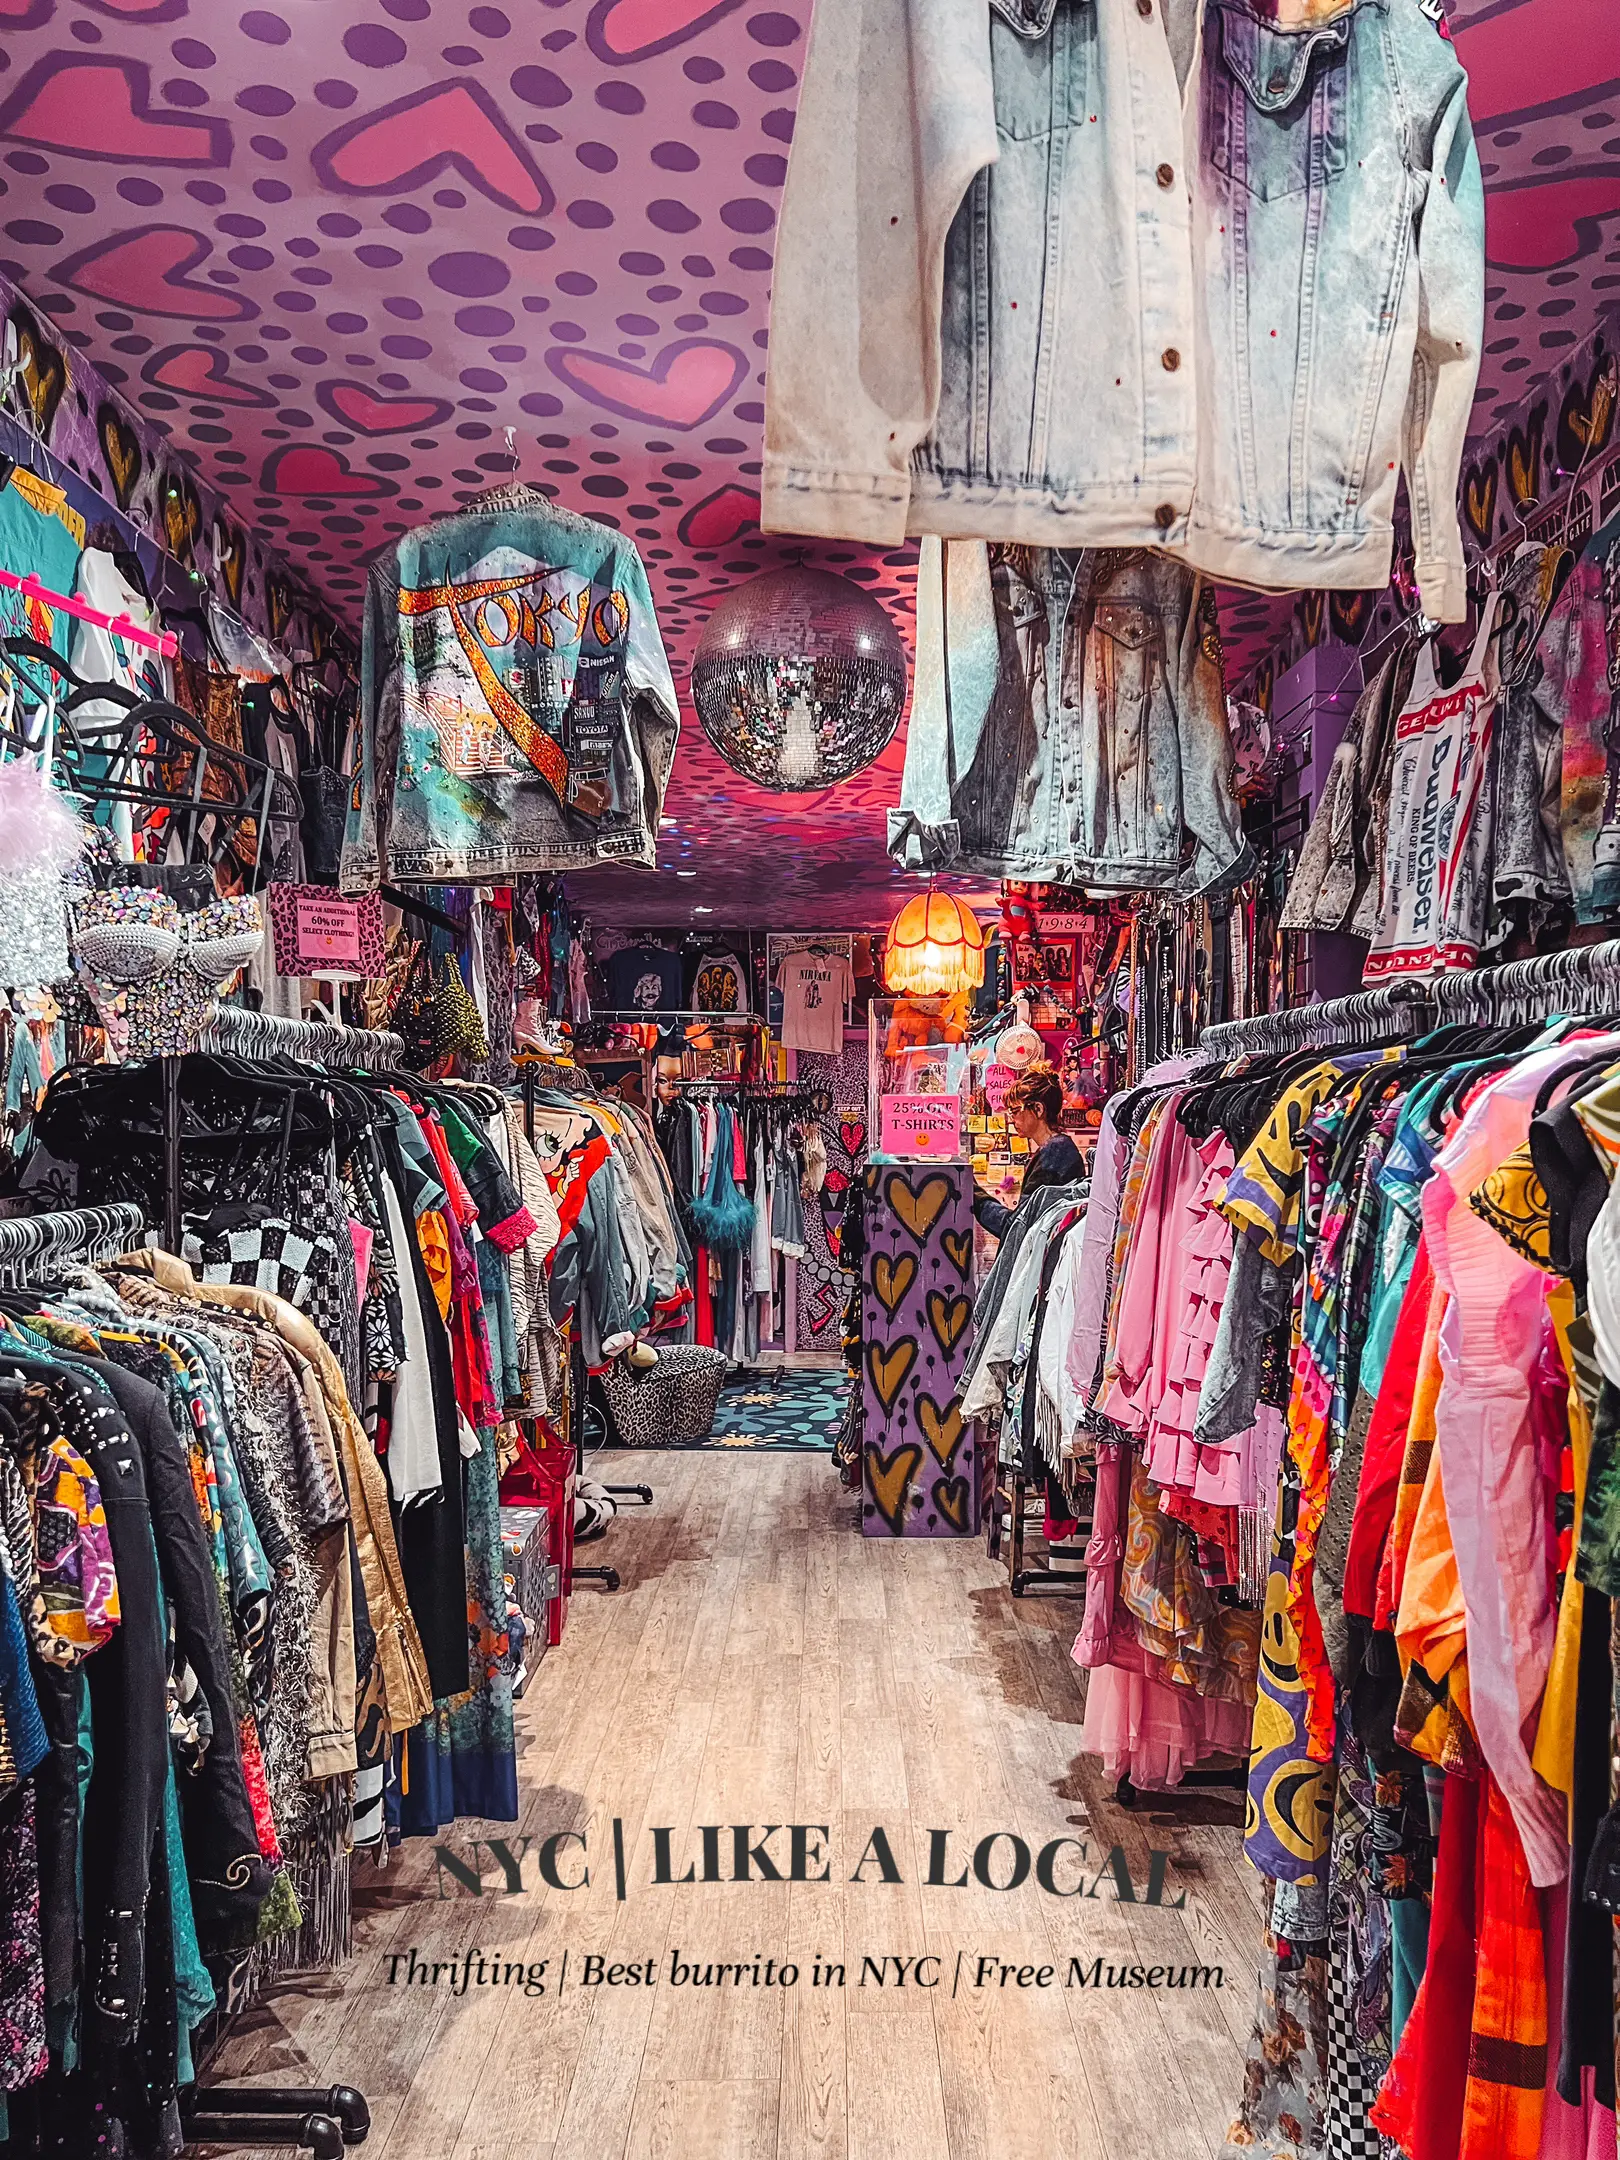  A store with a lot of colorful clothes on display.